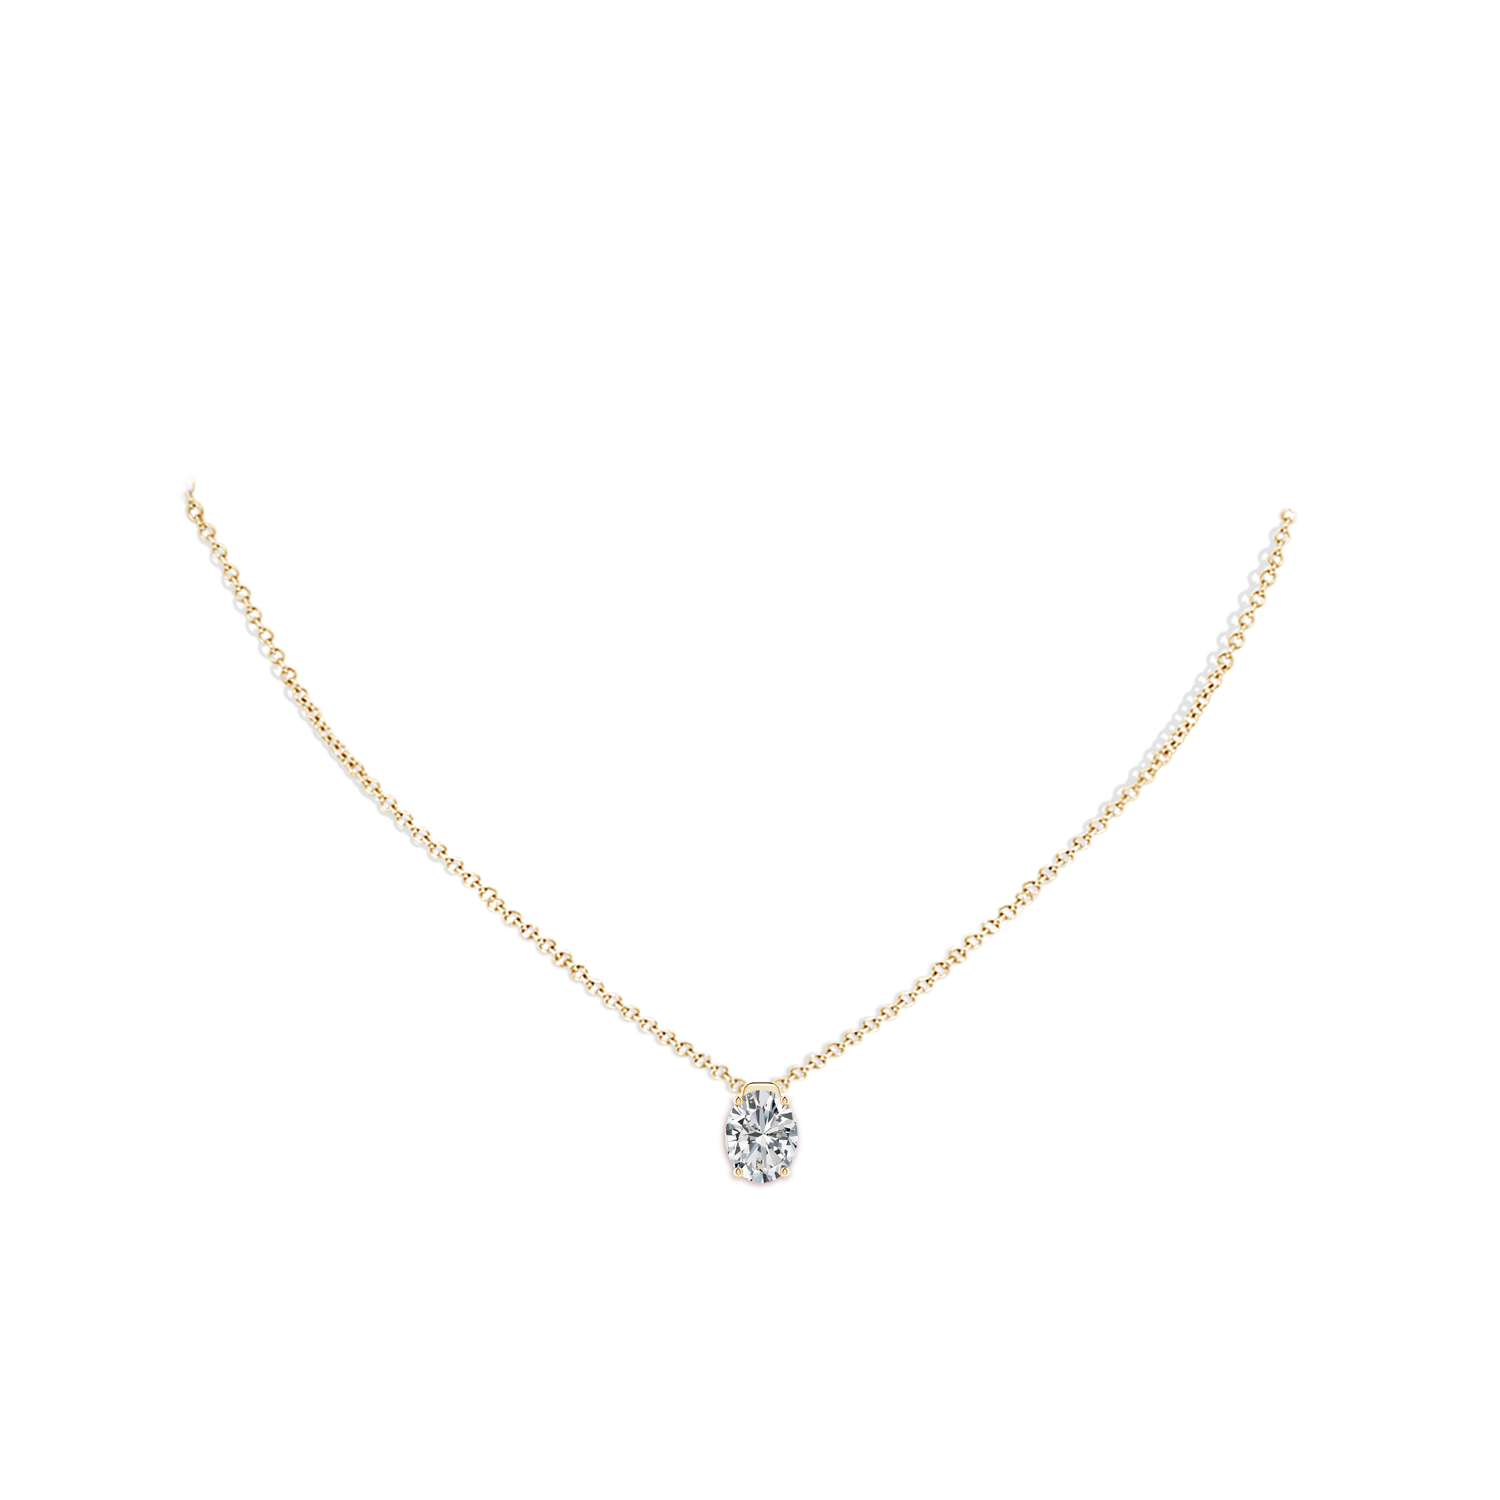 H, SI2 / 1.76 CT / 14 KT Yellow Gold